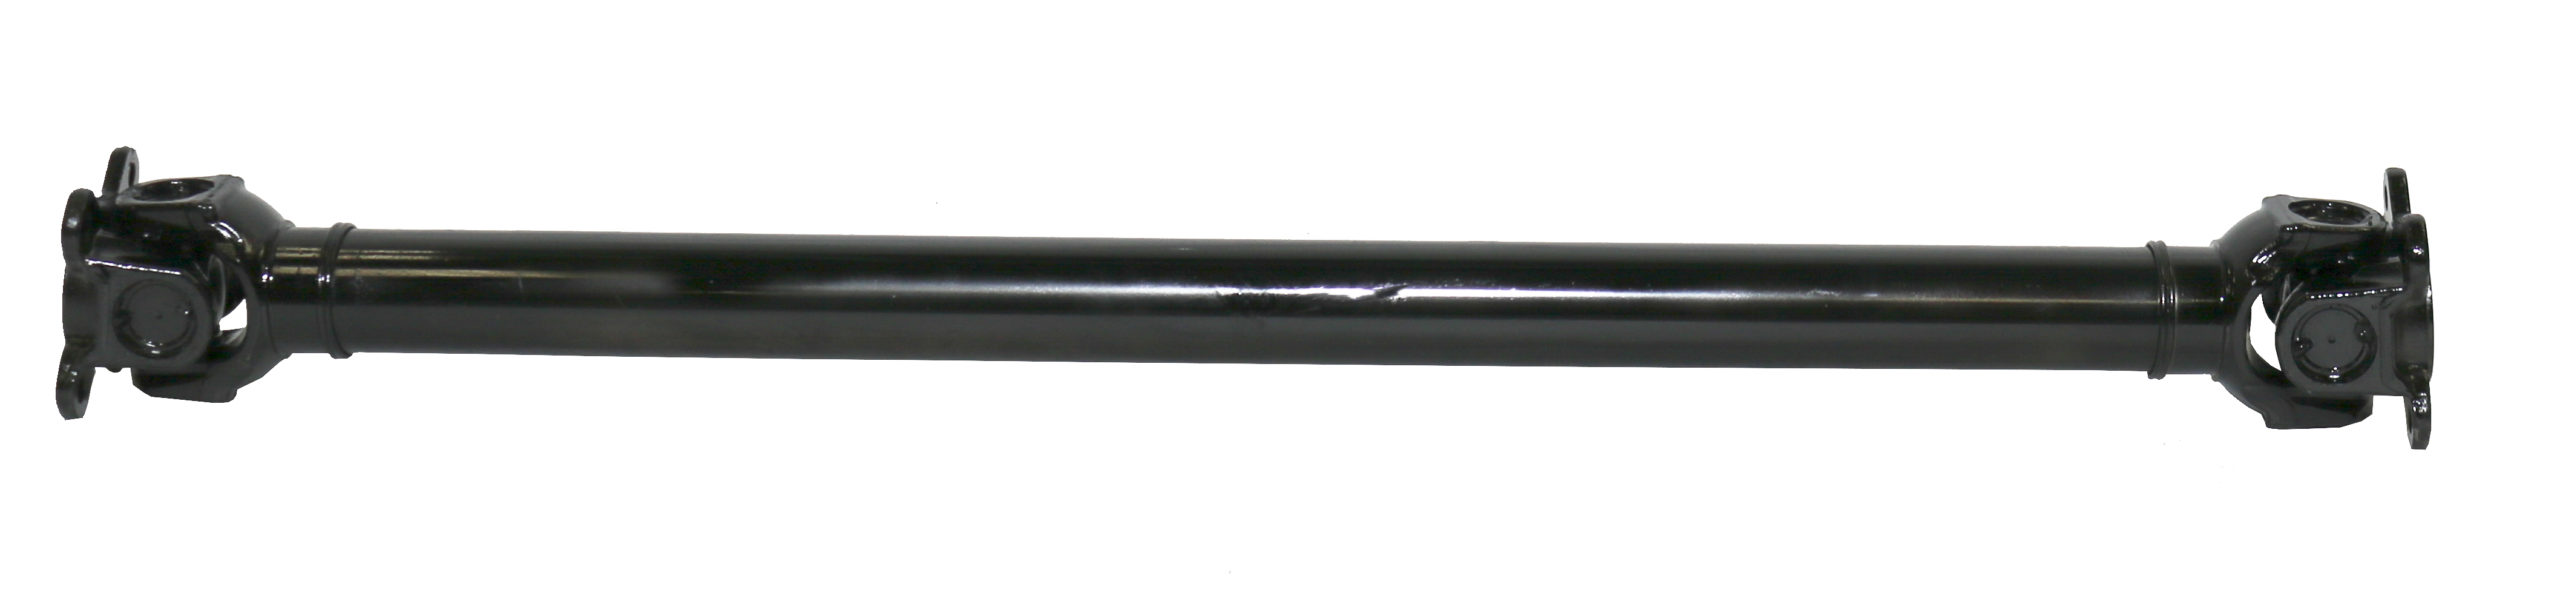 Front driveshaft for BMW all wheel drive.